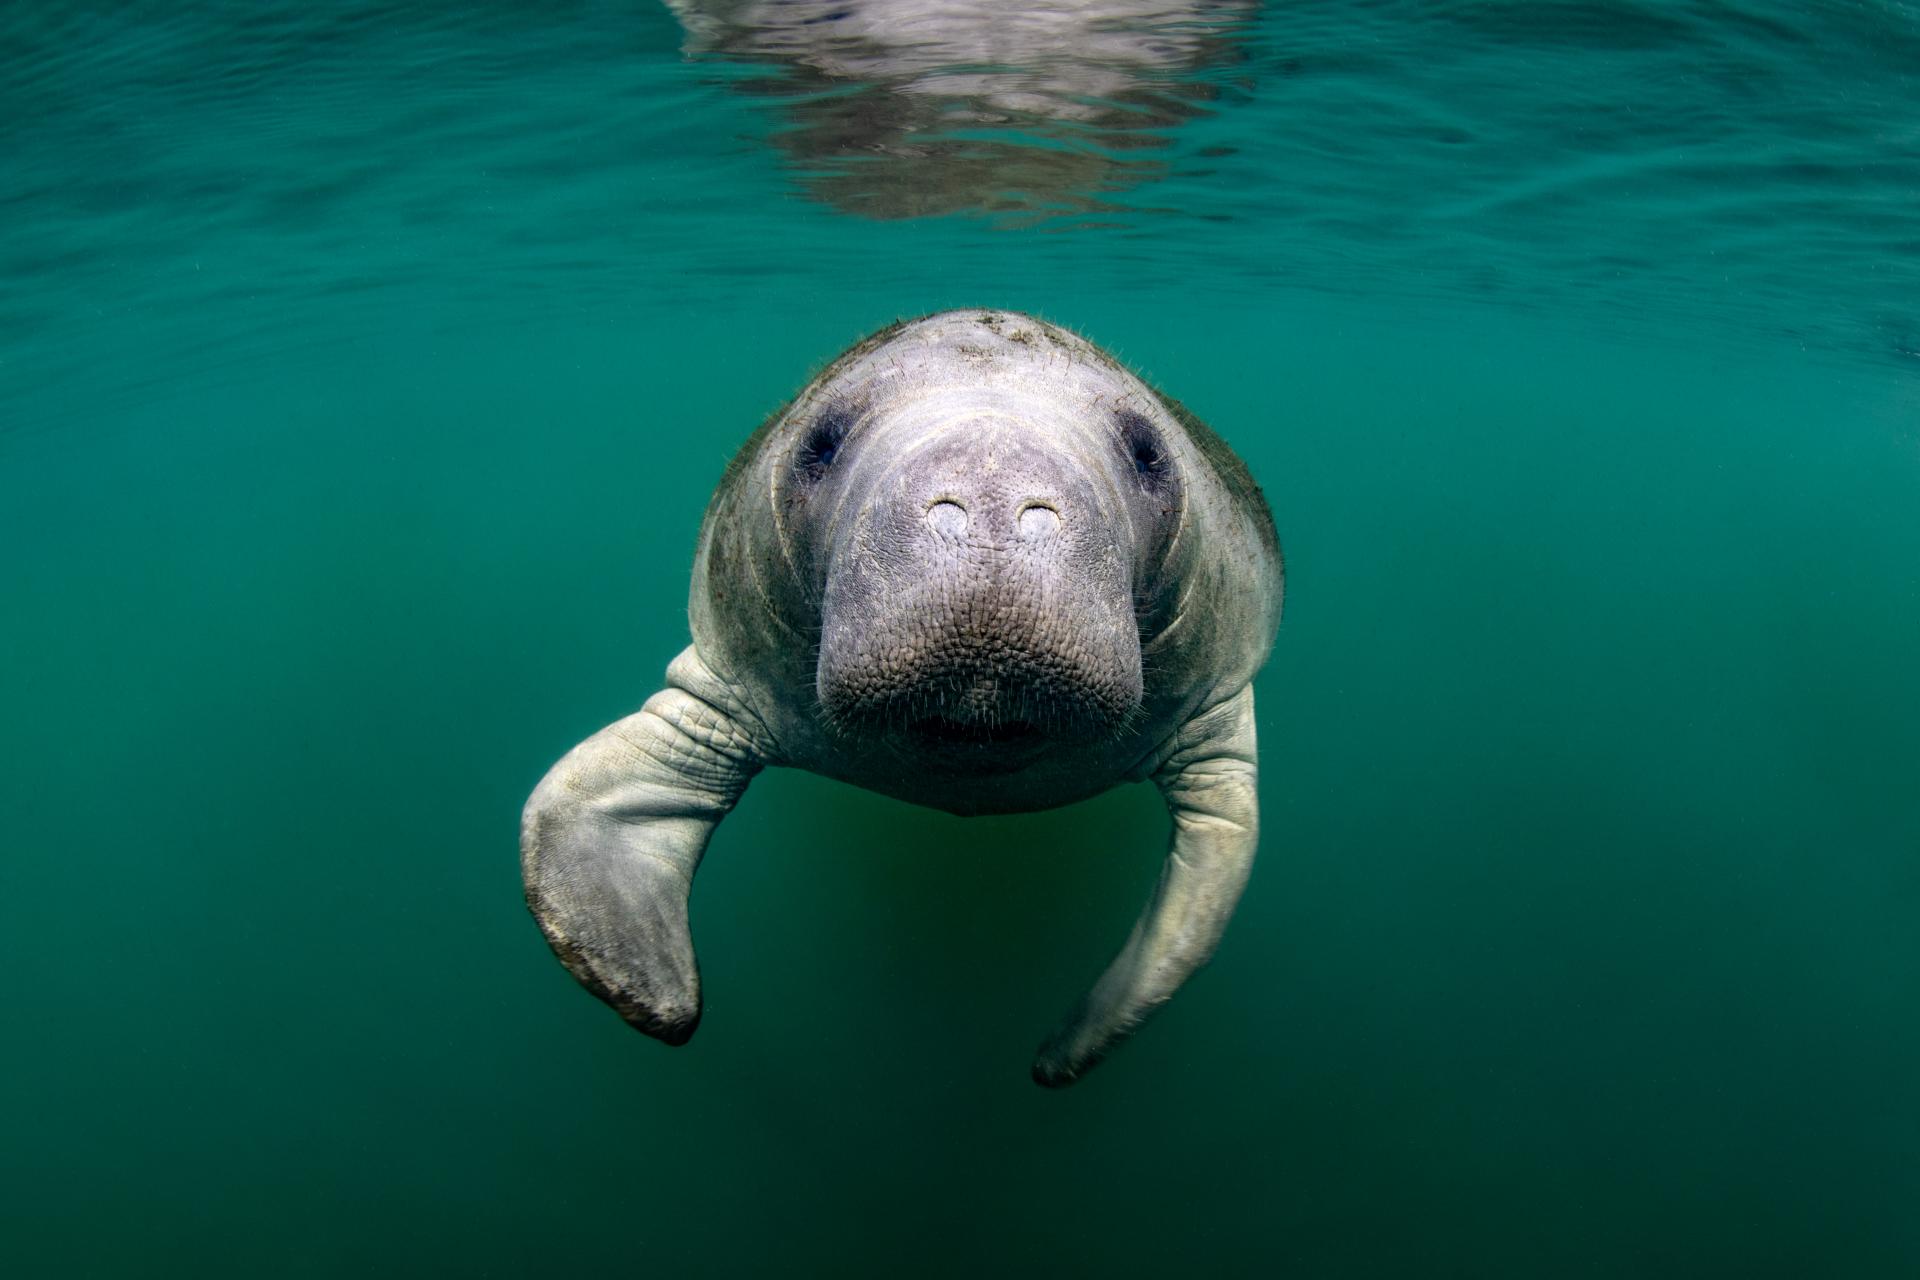 A picture of a manatee in water.